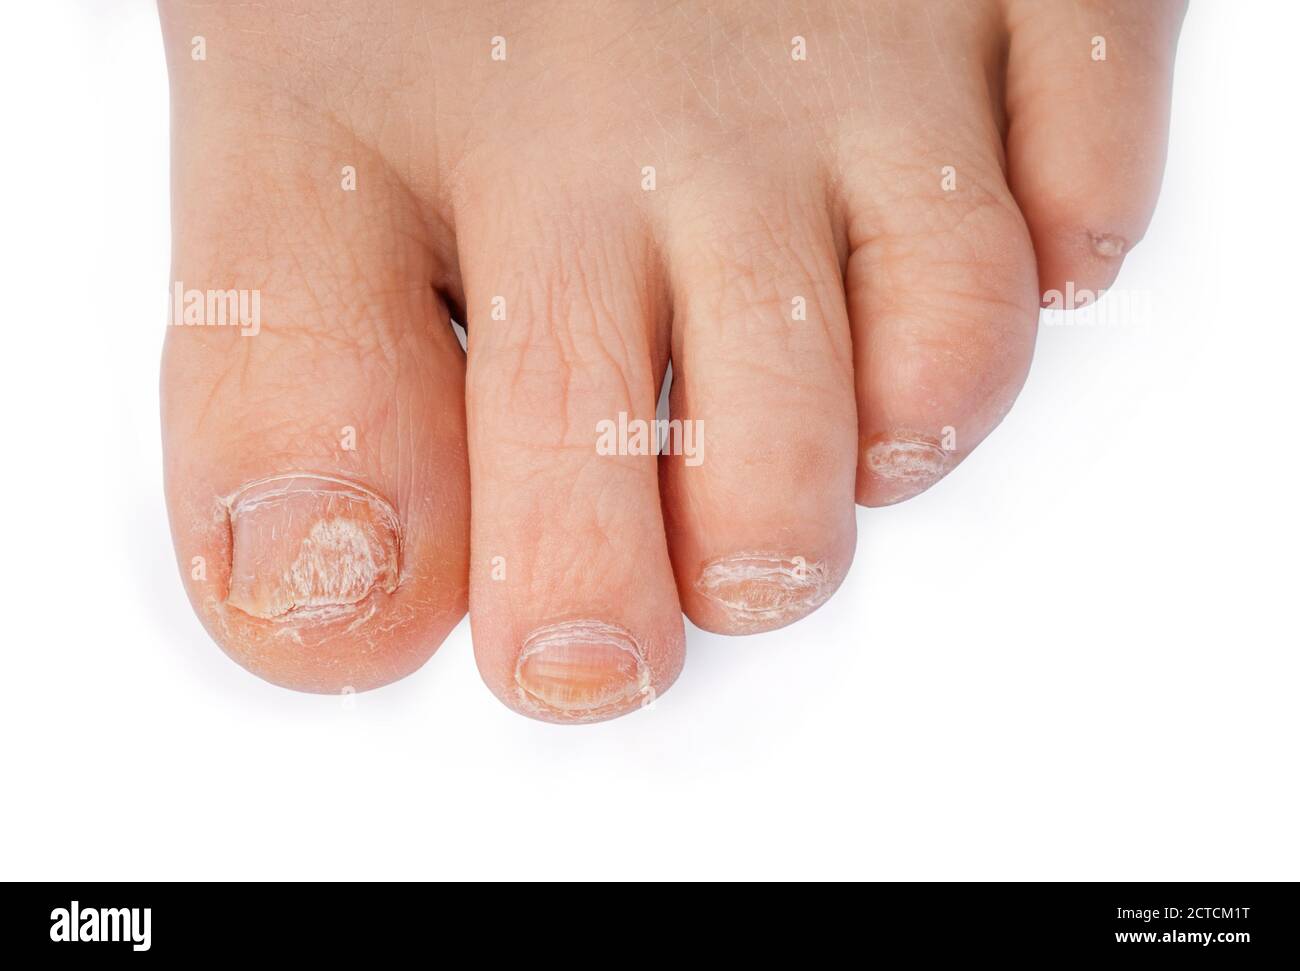 Toenail fungus infection. Partial foot close up.  All toenails are milky yellow discolored, oddly shaped and deformed and cracked (Onycholysis). Isola Stock Photo